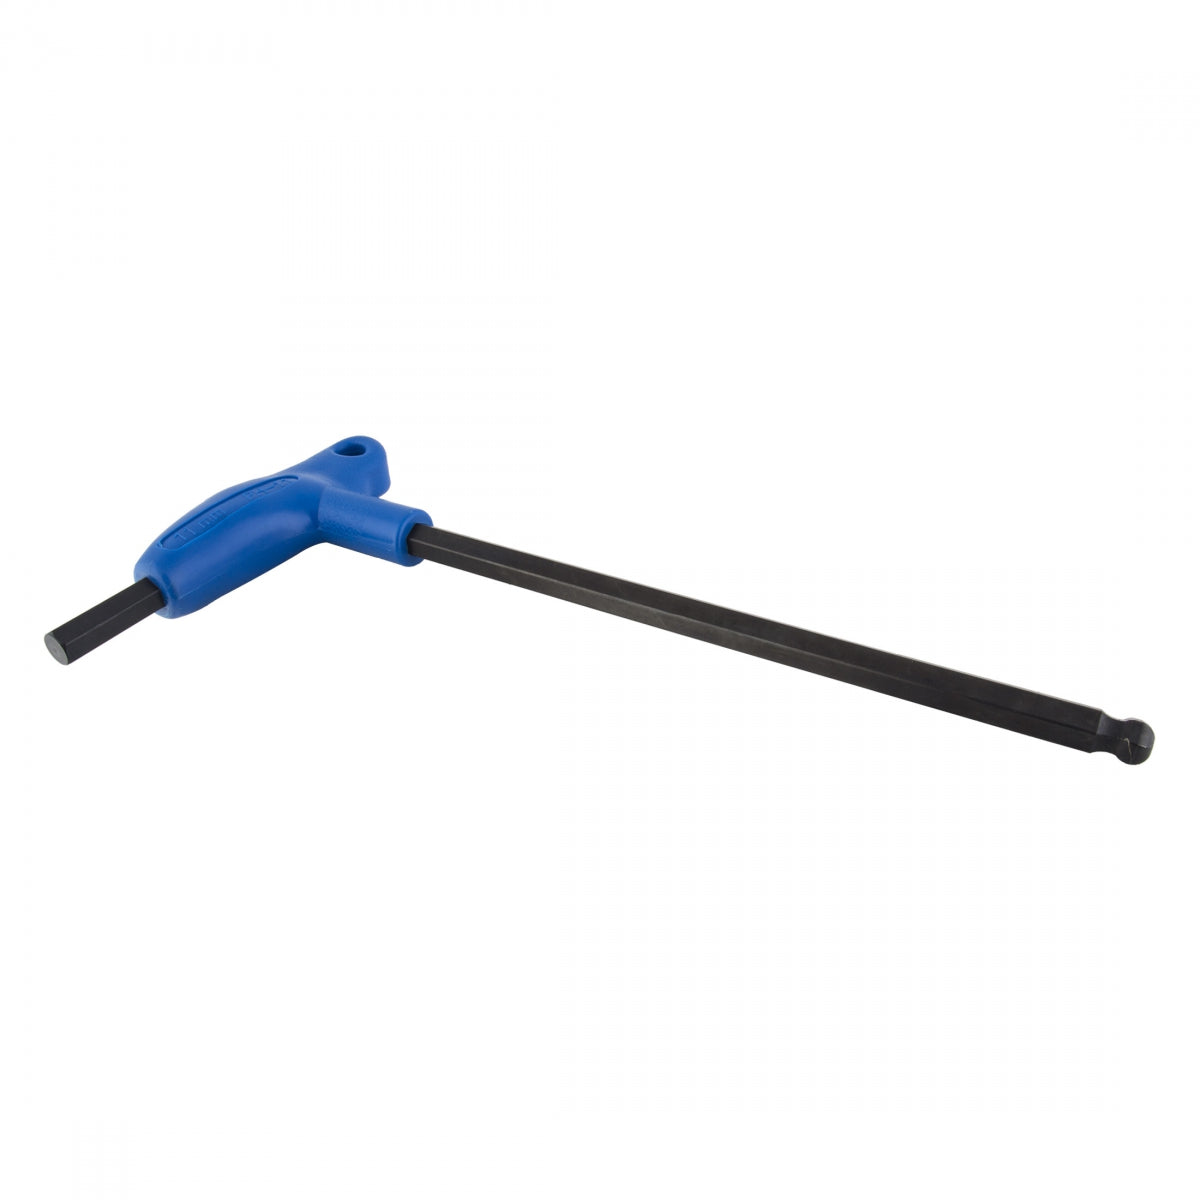 Park Tool #PH-11 P-Handle Hex Wrench, 11mm